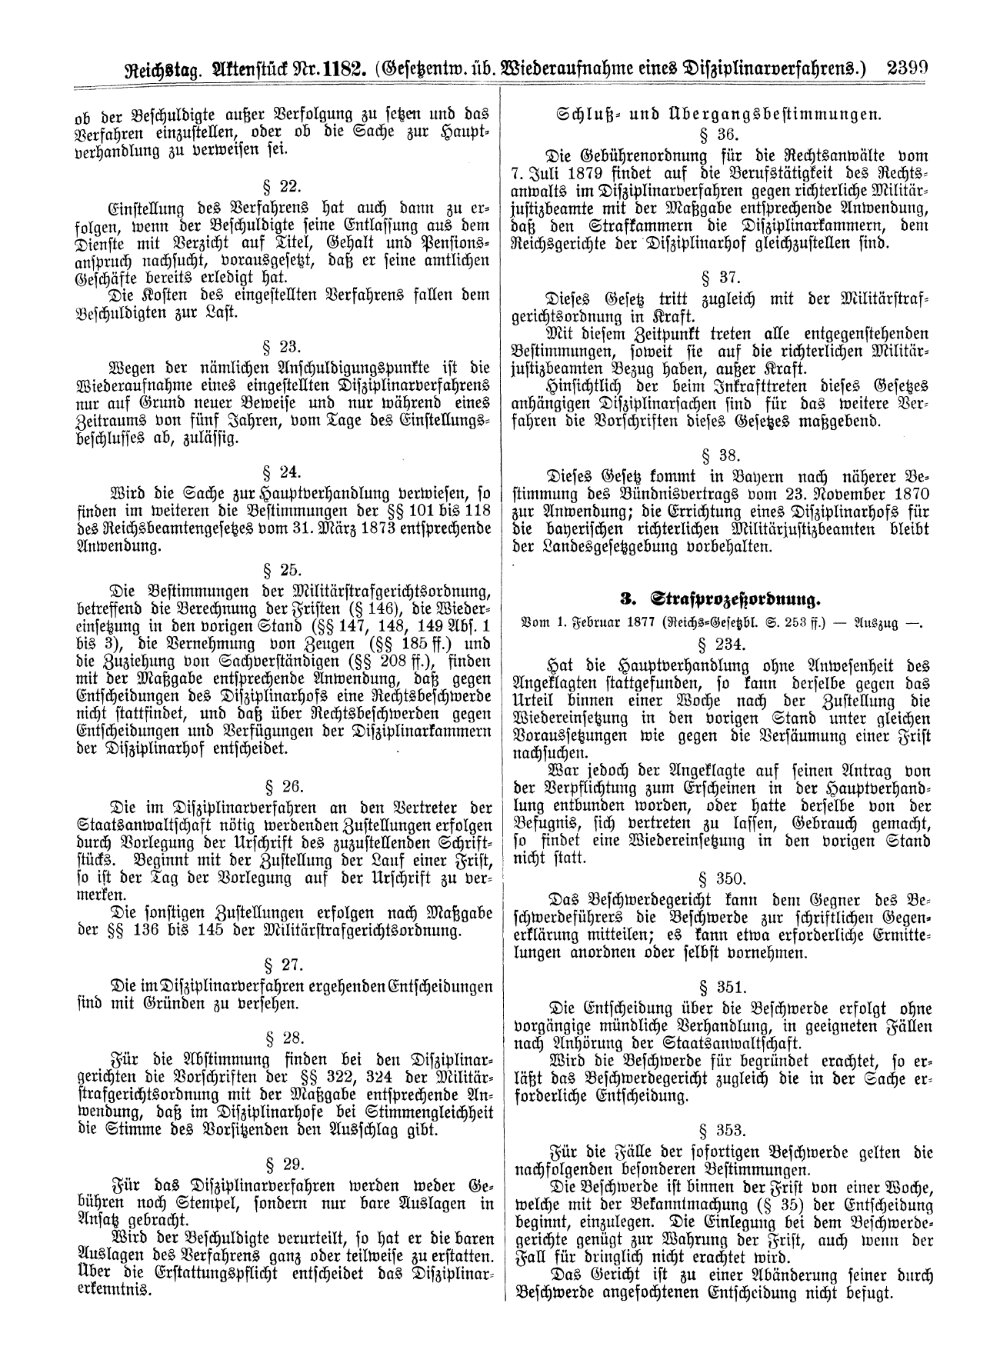 Scan of page 2399